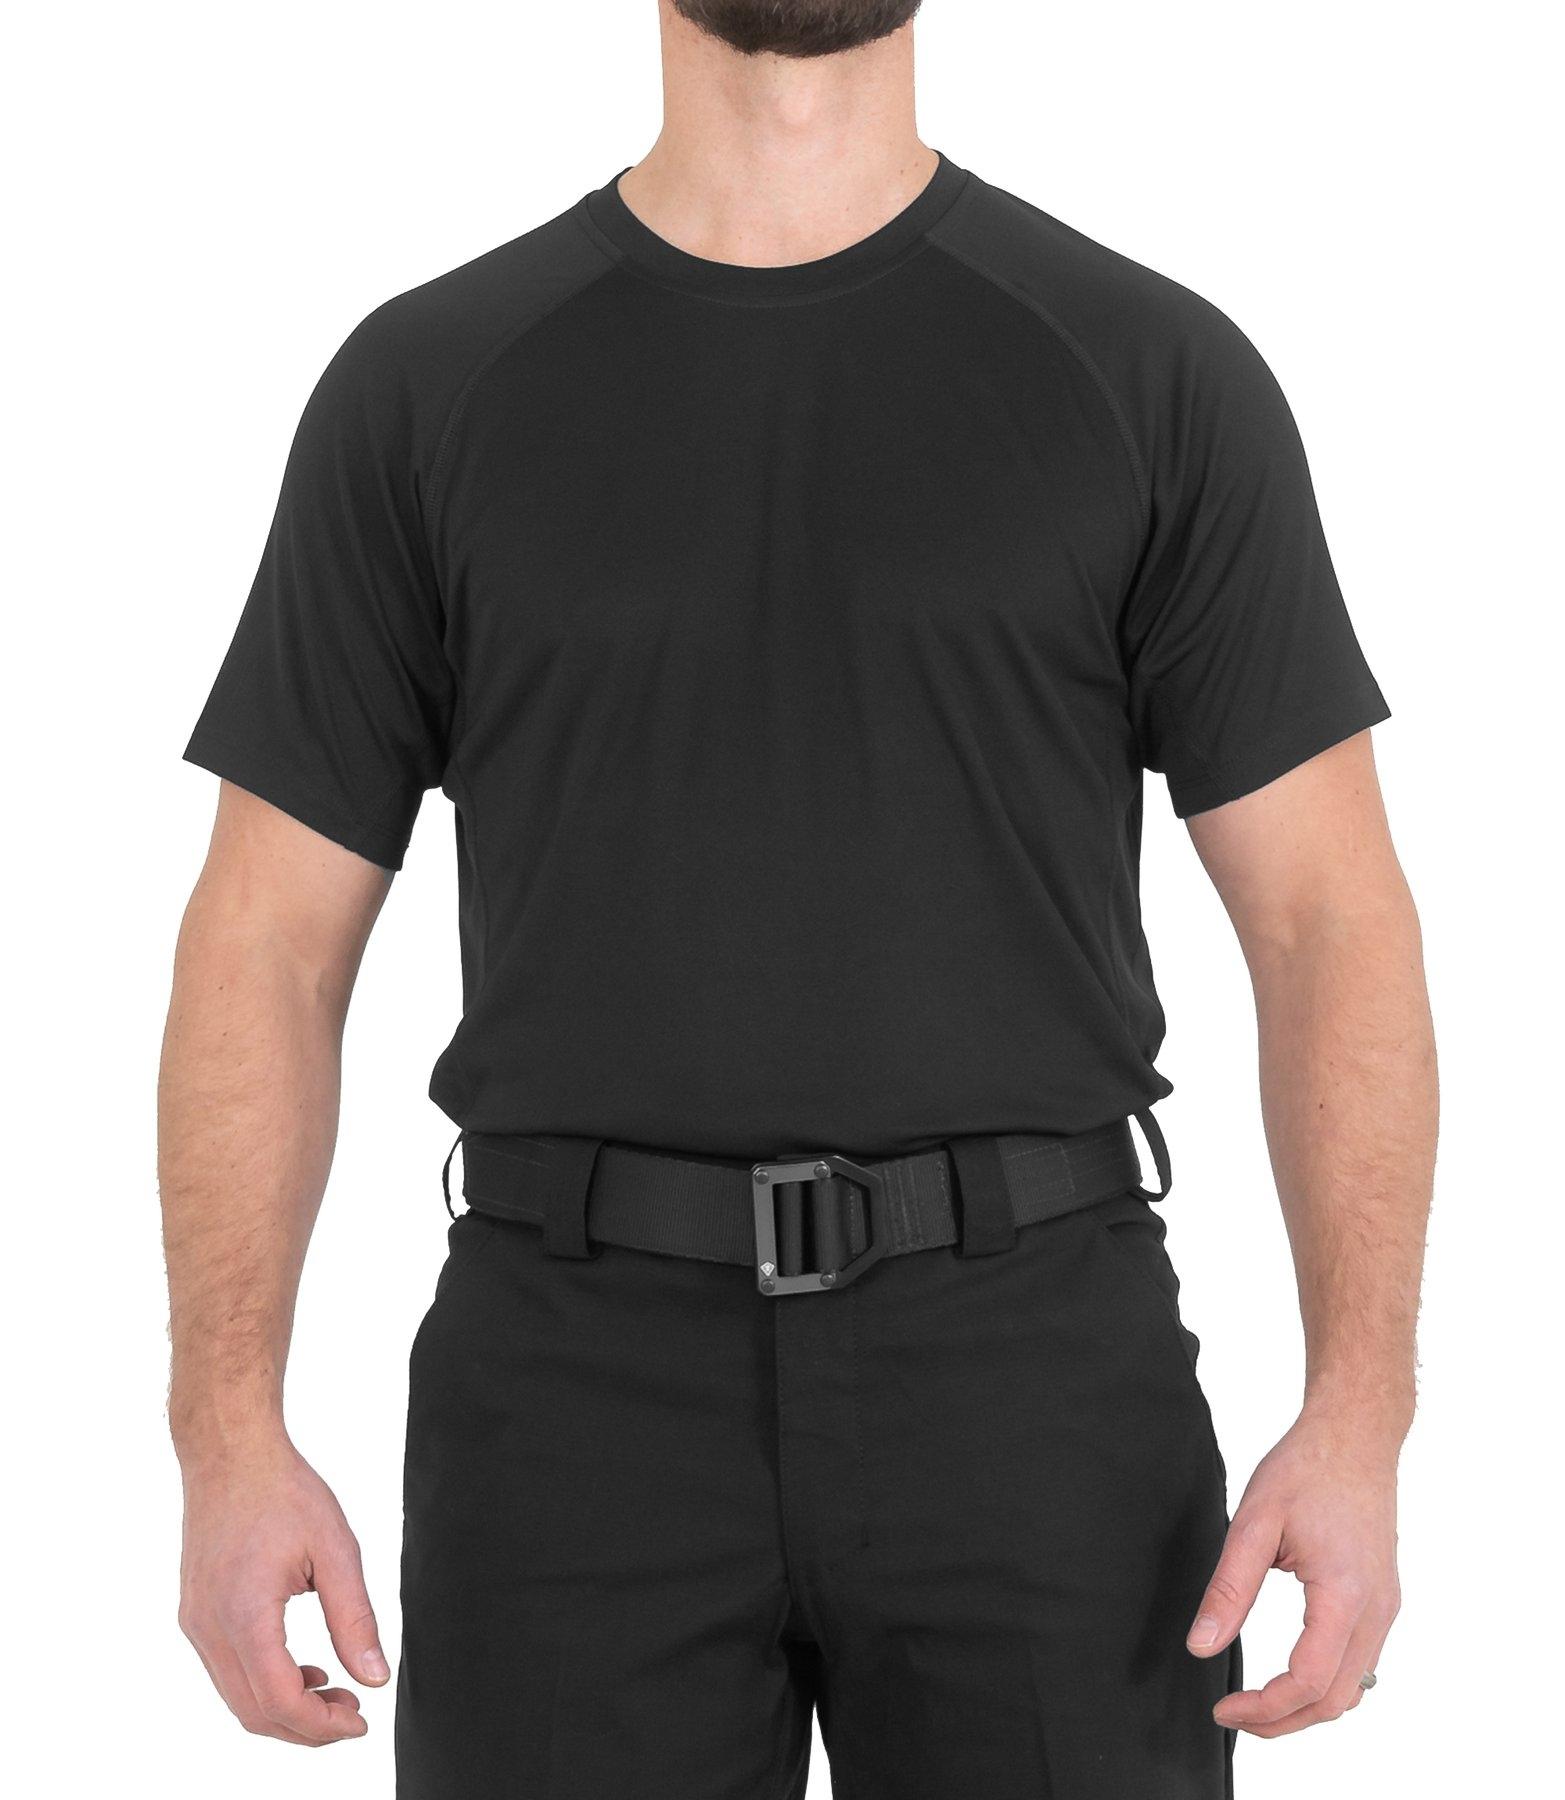 First Tactical Men's Performance Training S/S Shirt, Black